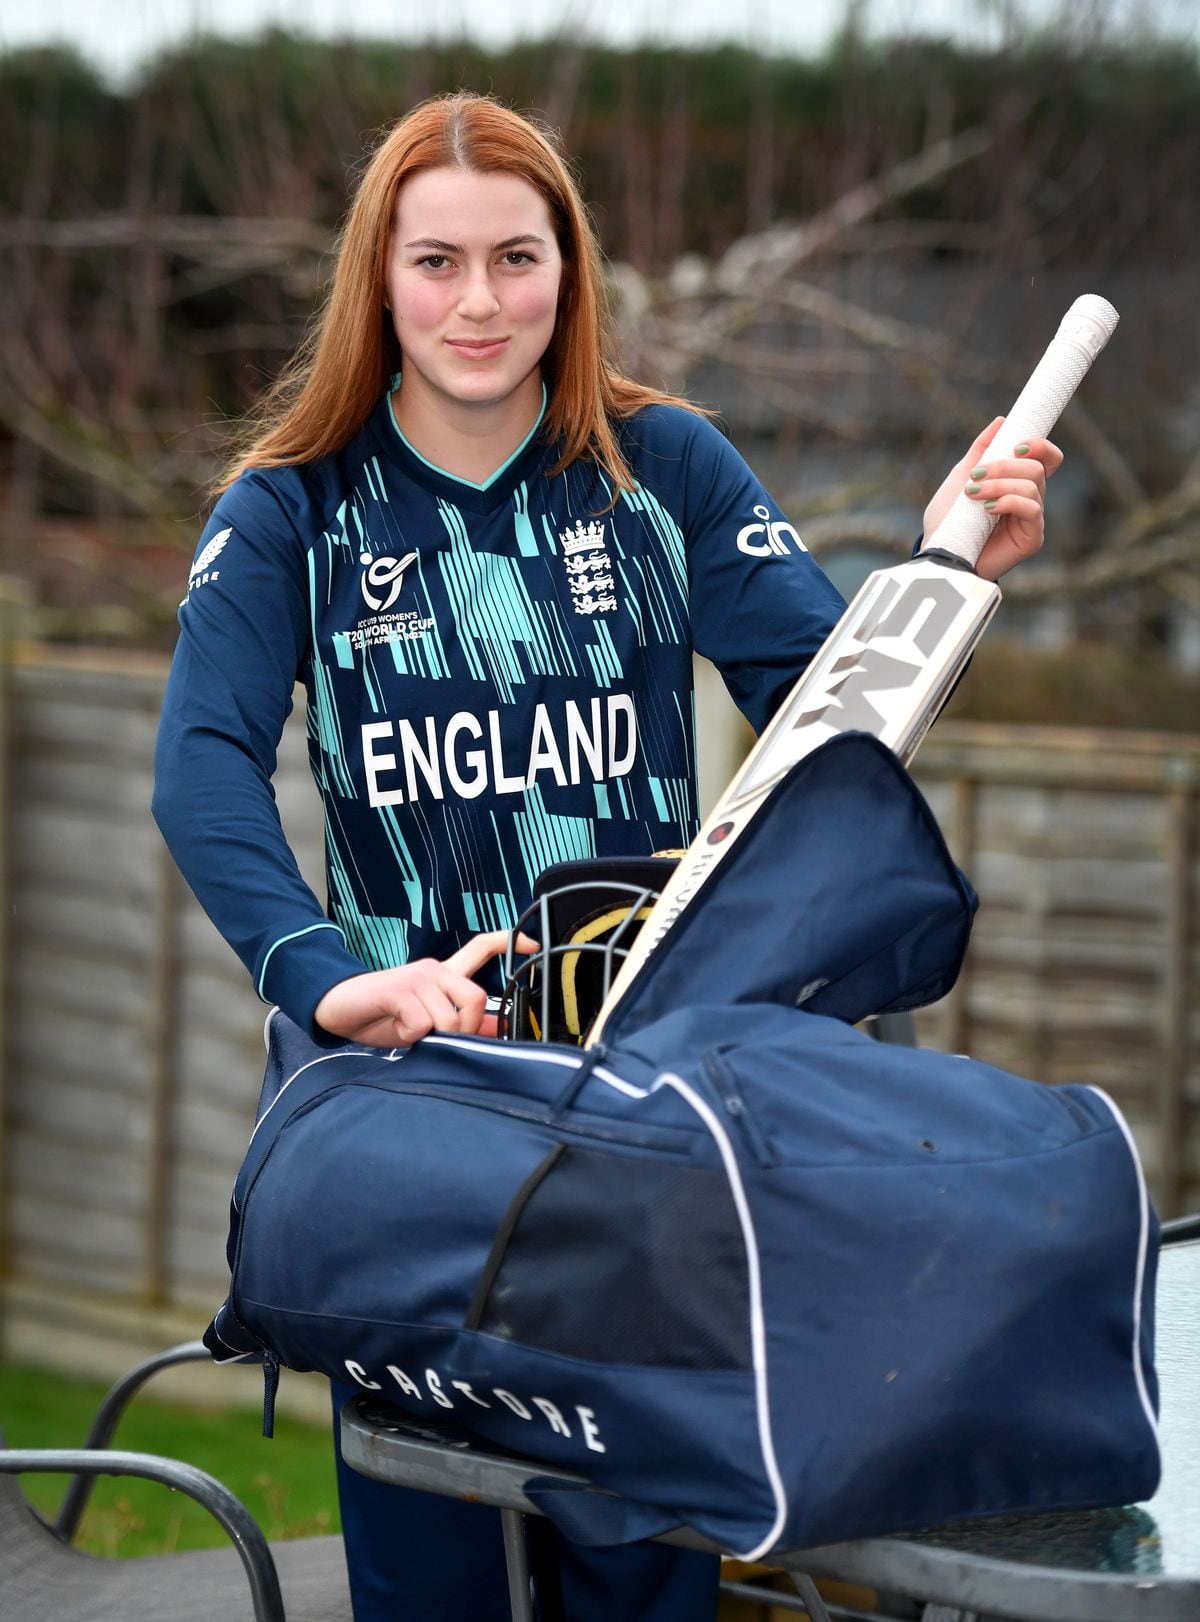 Ellie Anderson, 19-year-old cricketer from Bridgnorth